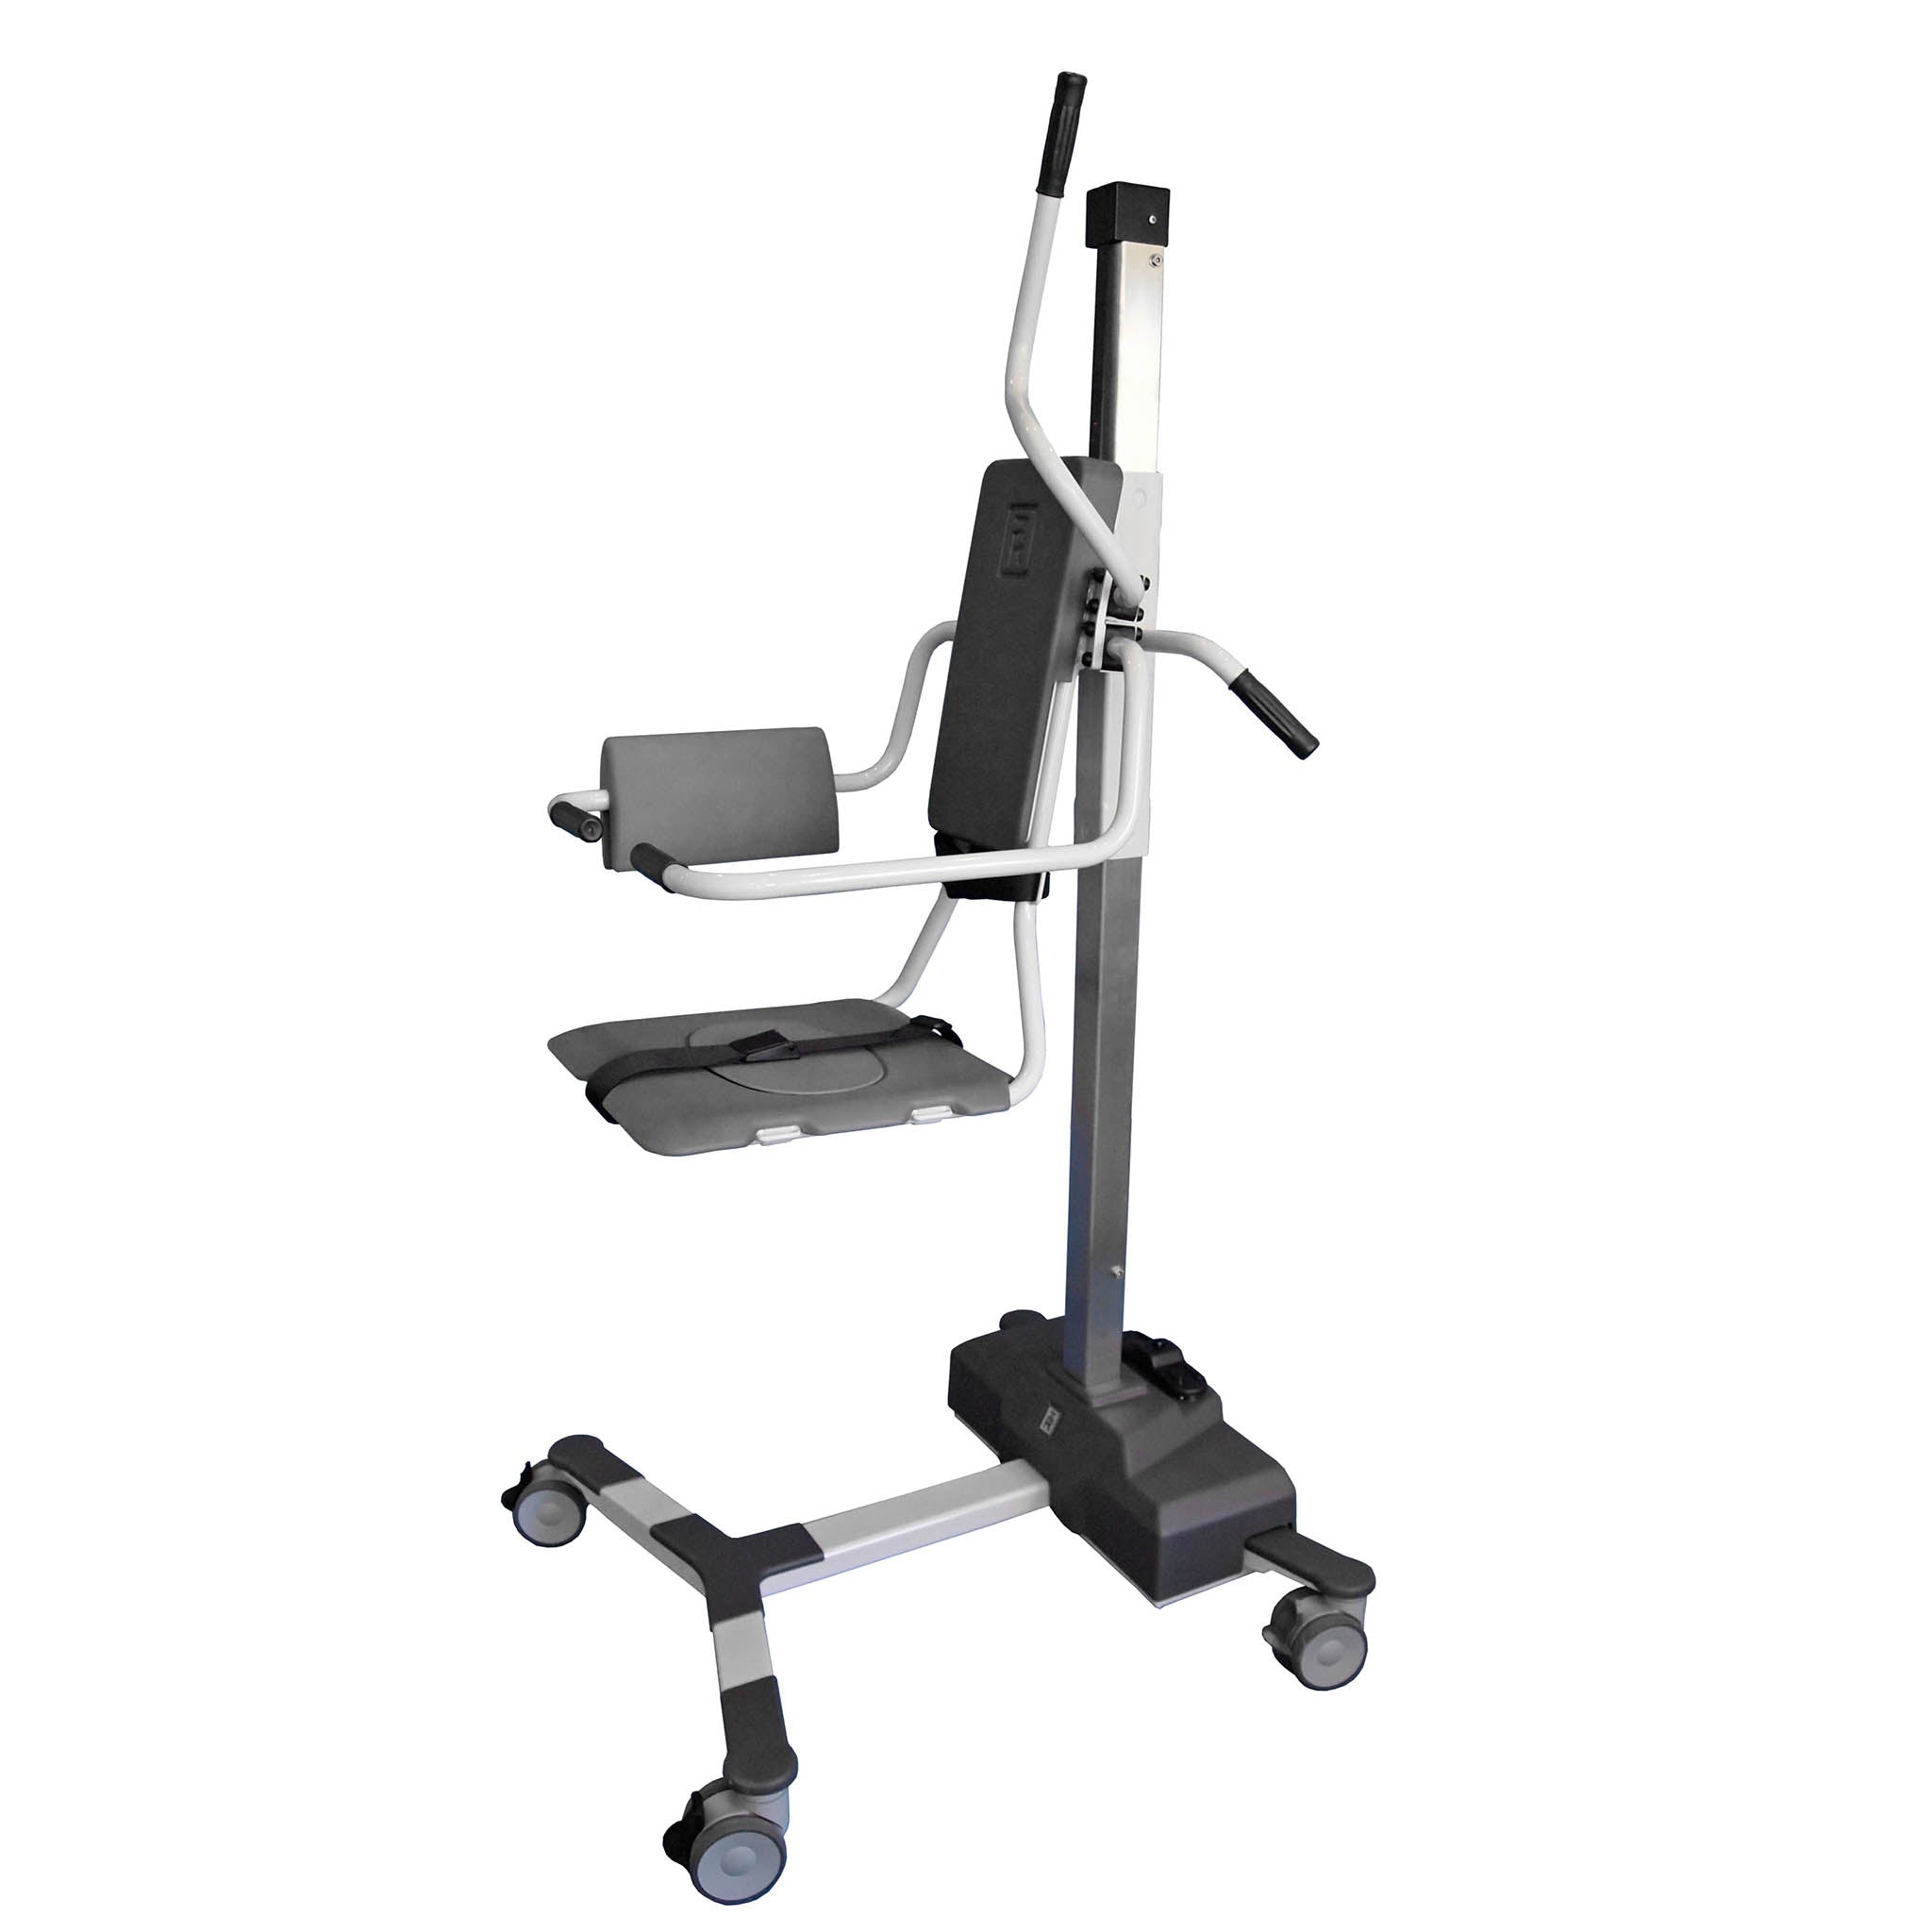 TR Equipment TR9650Mobile Patient Bath Combi Lift with Chair